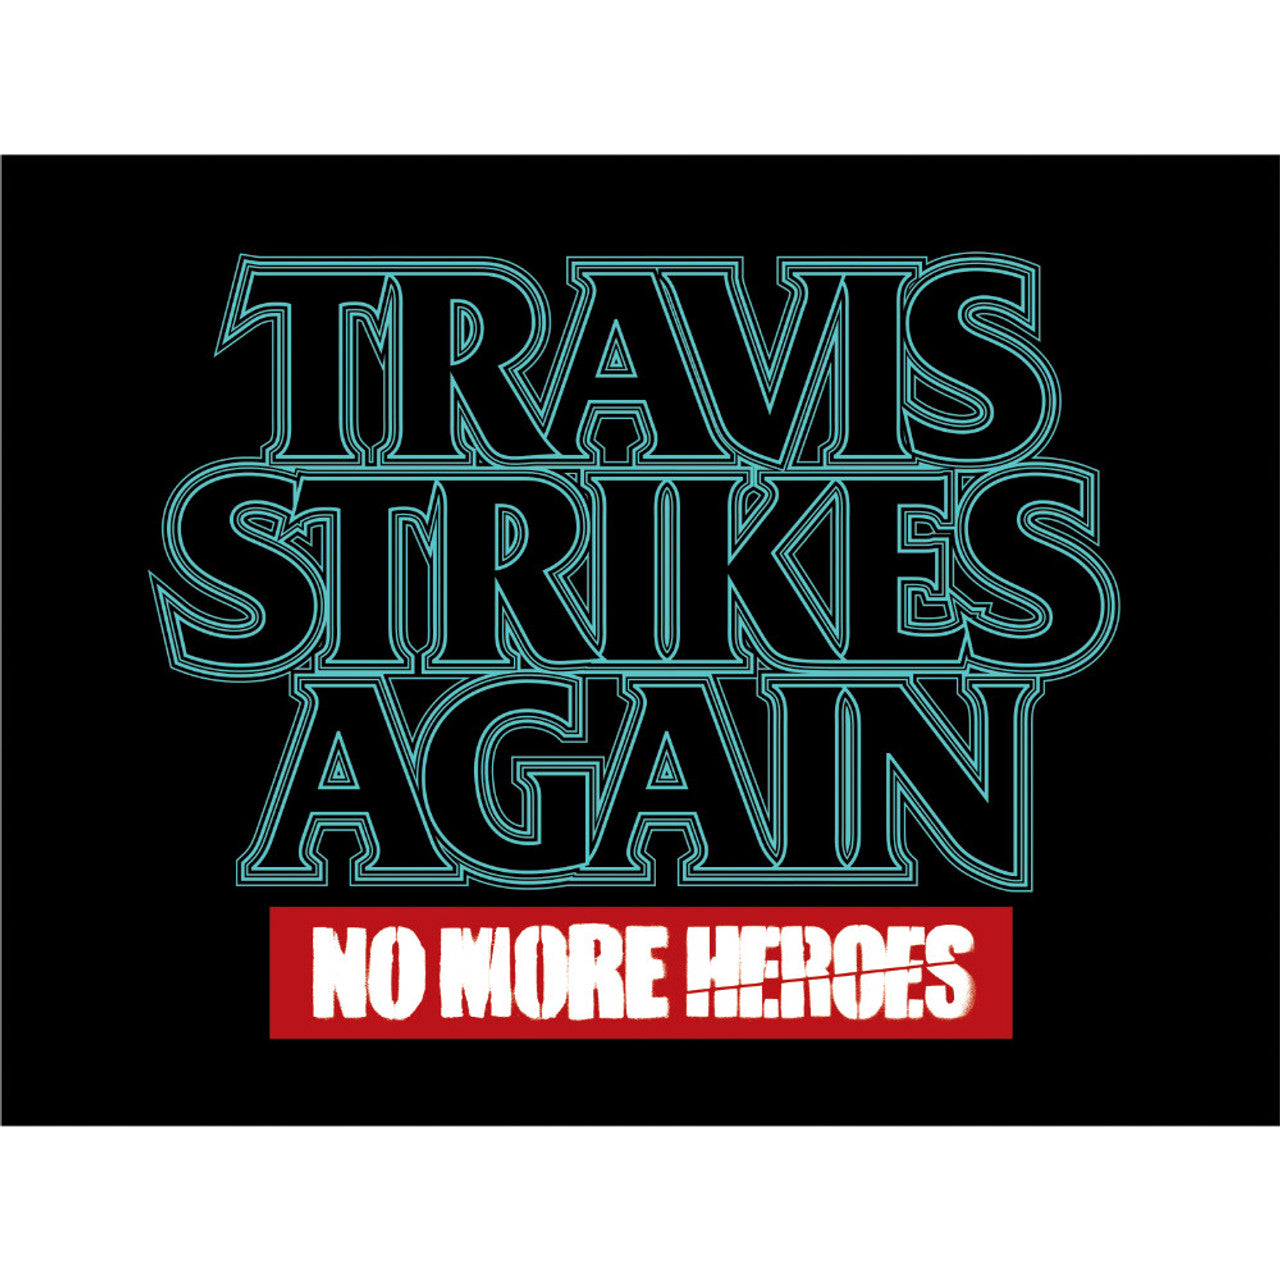 Product Image : This is brand new.<br>Get into the game—literally! Beam Katana in hand, Travis Strikes Again!

Several years after No More Heroes 2... This time, the setting is a small town in the middle of nowhere in the American South. Badman shows up at the trailer Travis has been living in to exact revenge for the murder of his daughter, Bad Girl, and things go horribly wrong. As they battle it out, the two are sucked into the game world of the legendary game console, the Death Drive MkⅡ. Developed by D